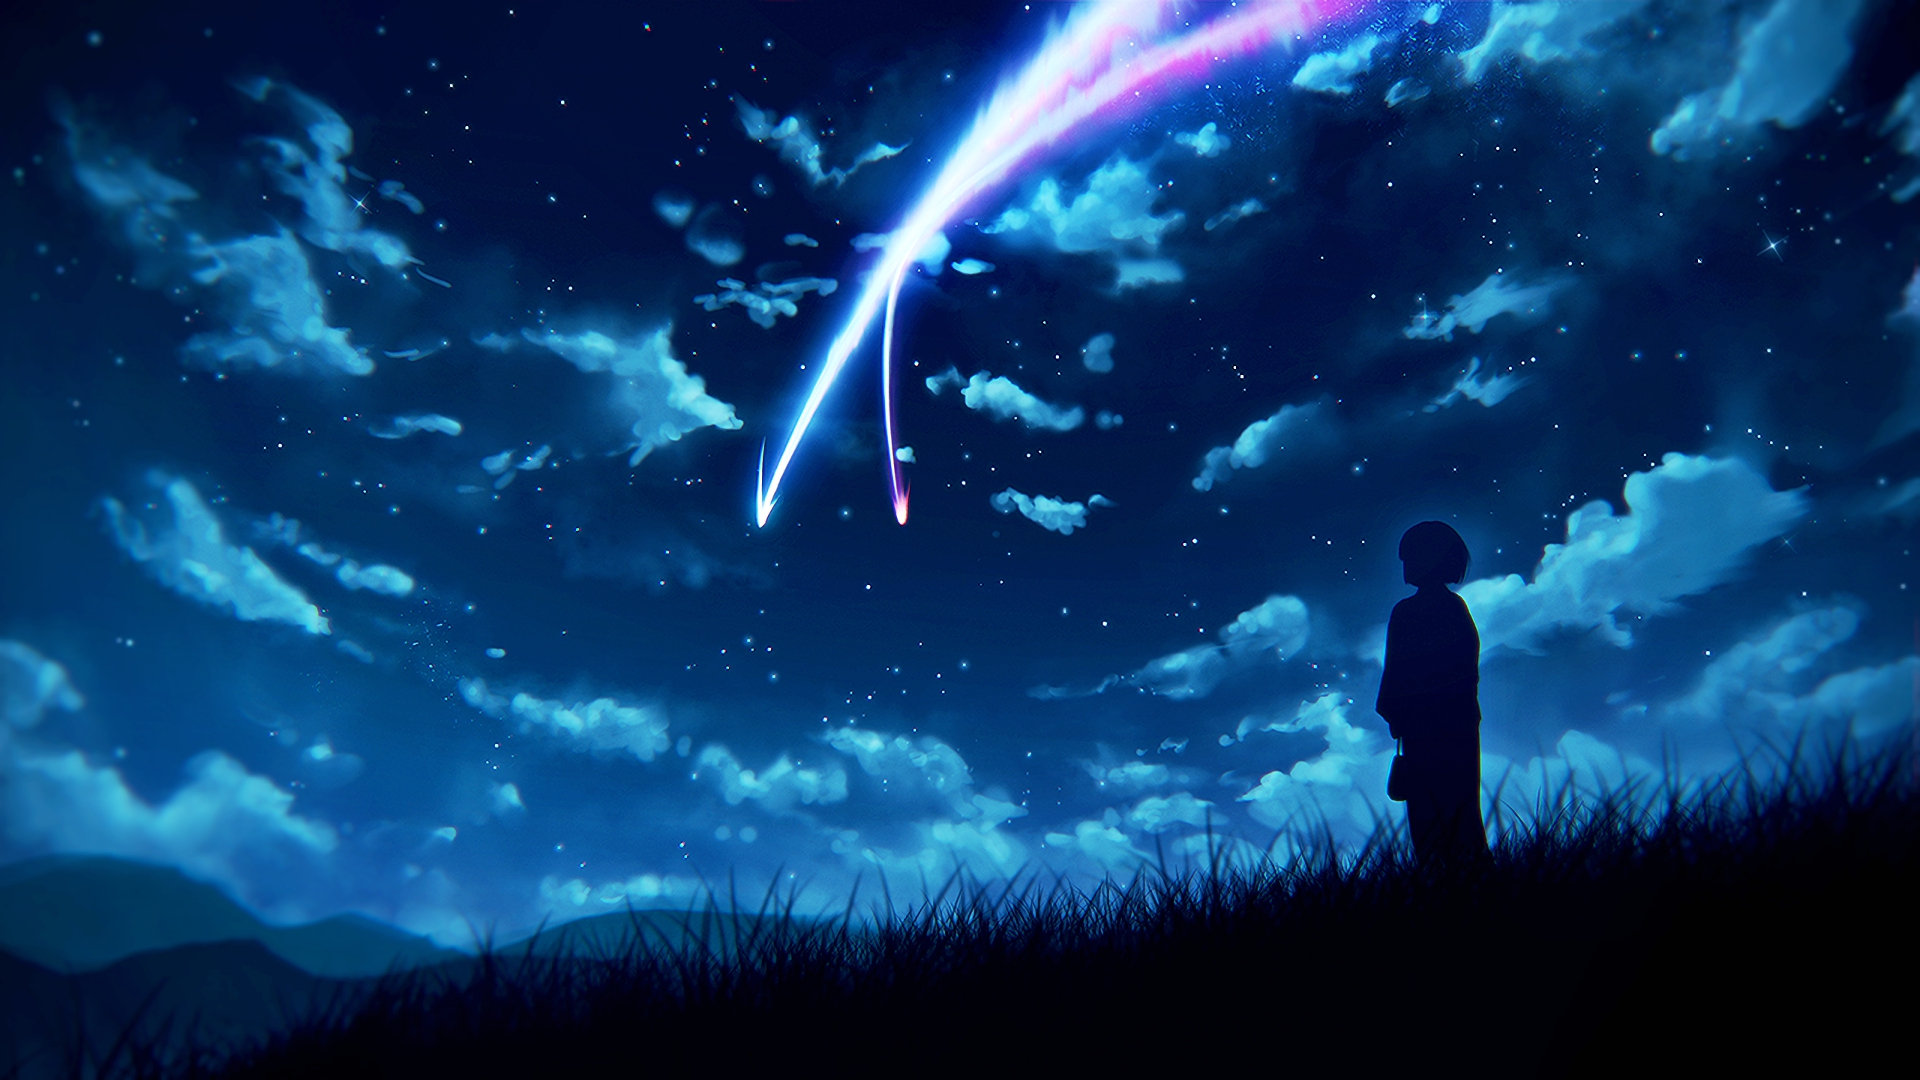 Your Name Landscape Wallpapers